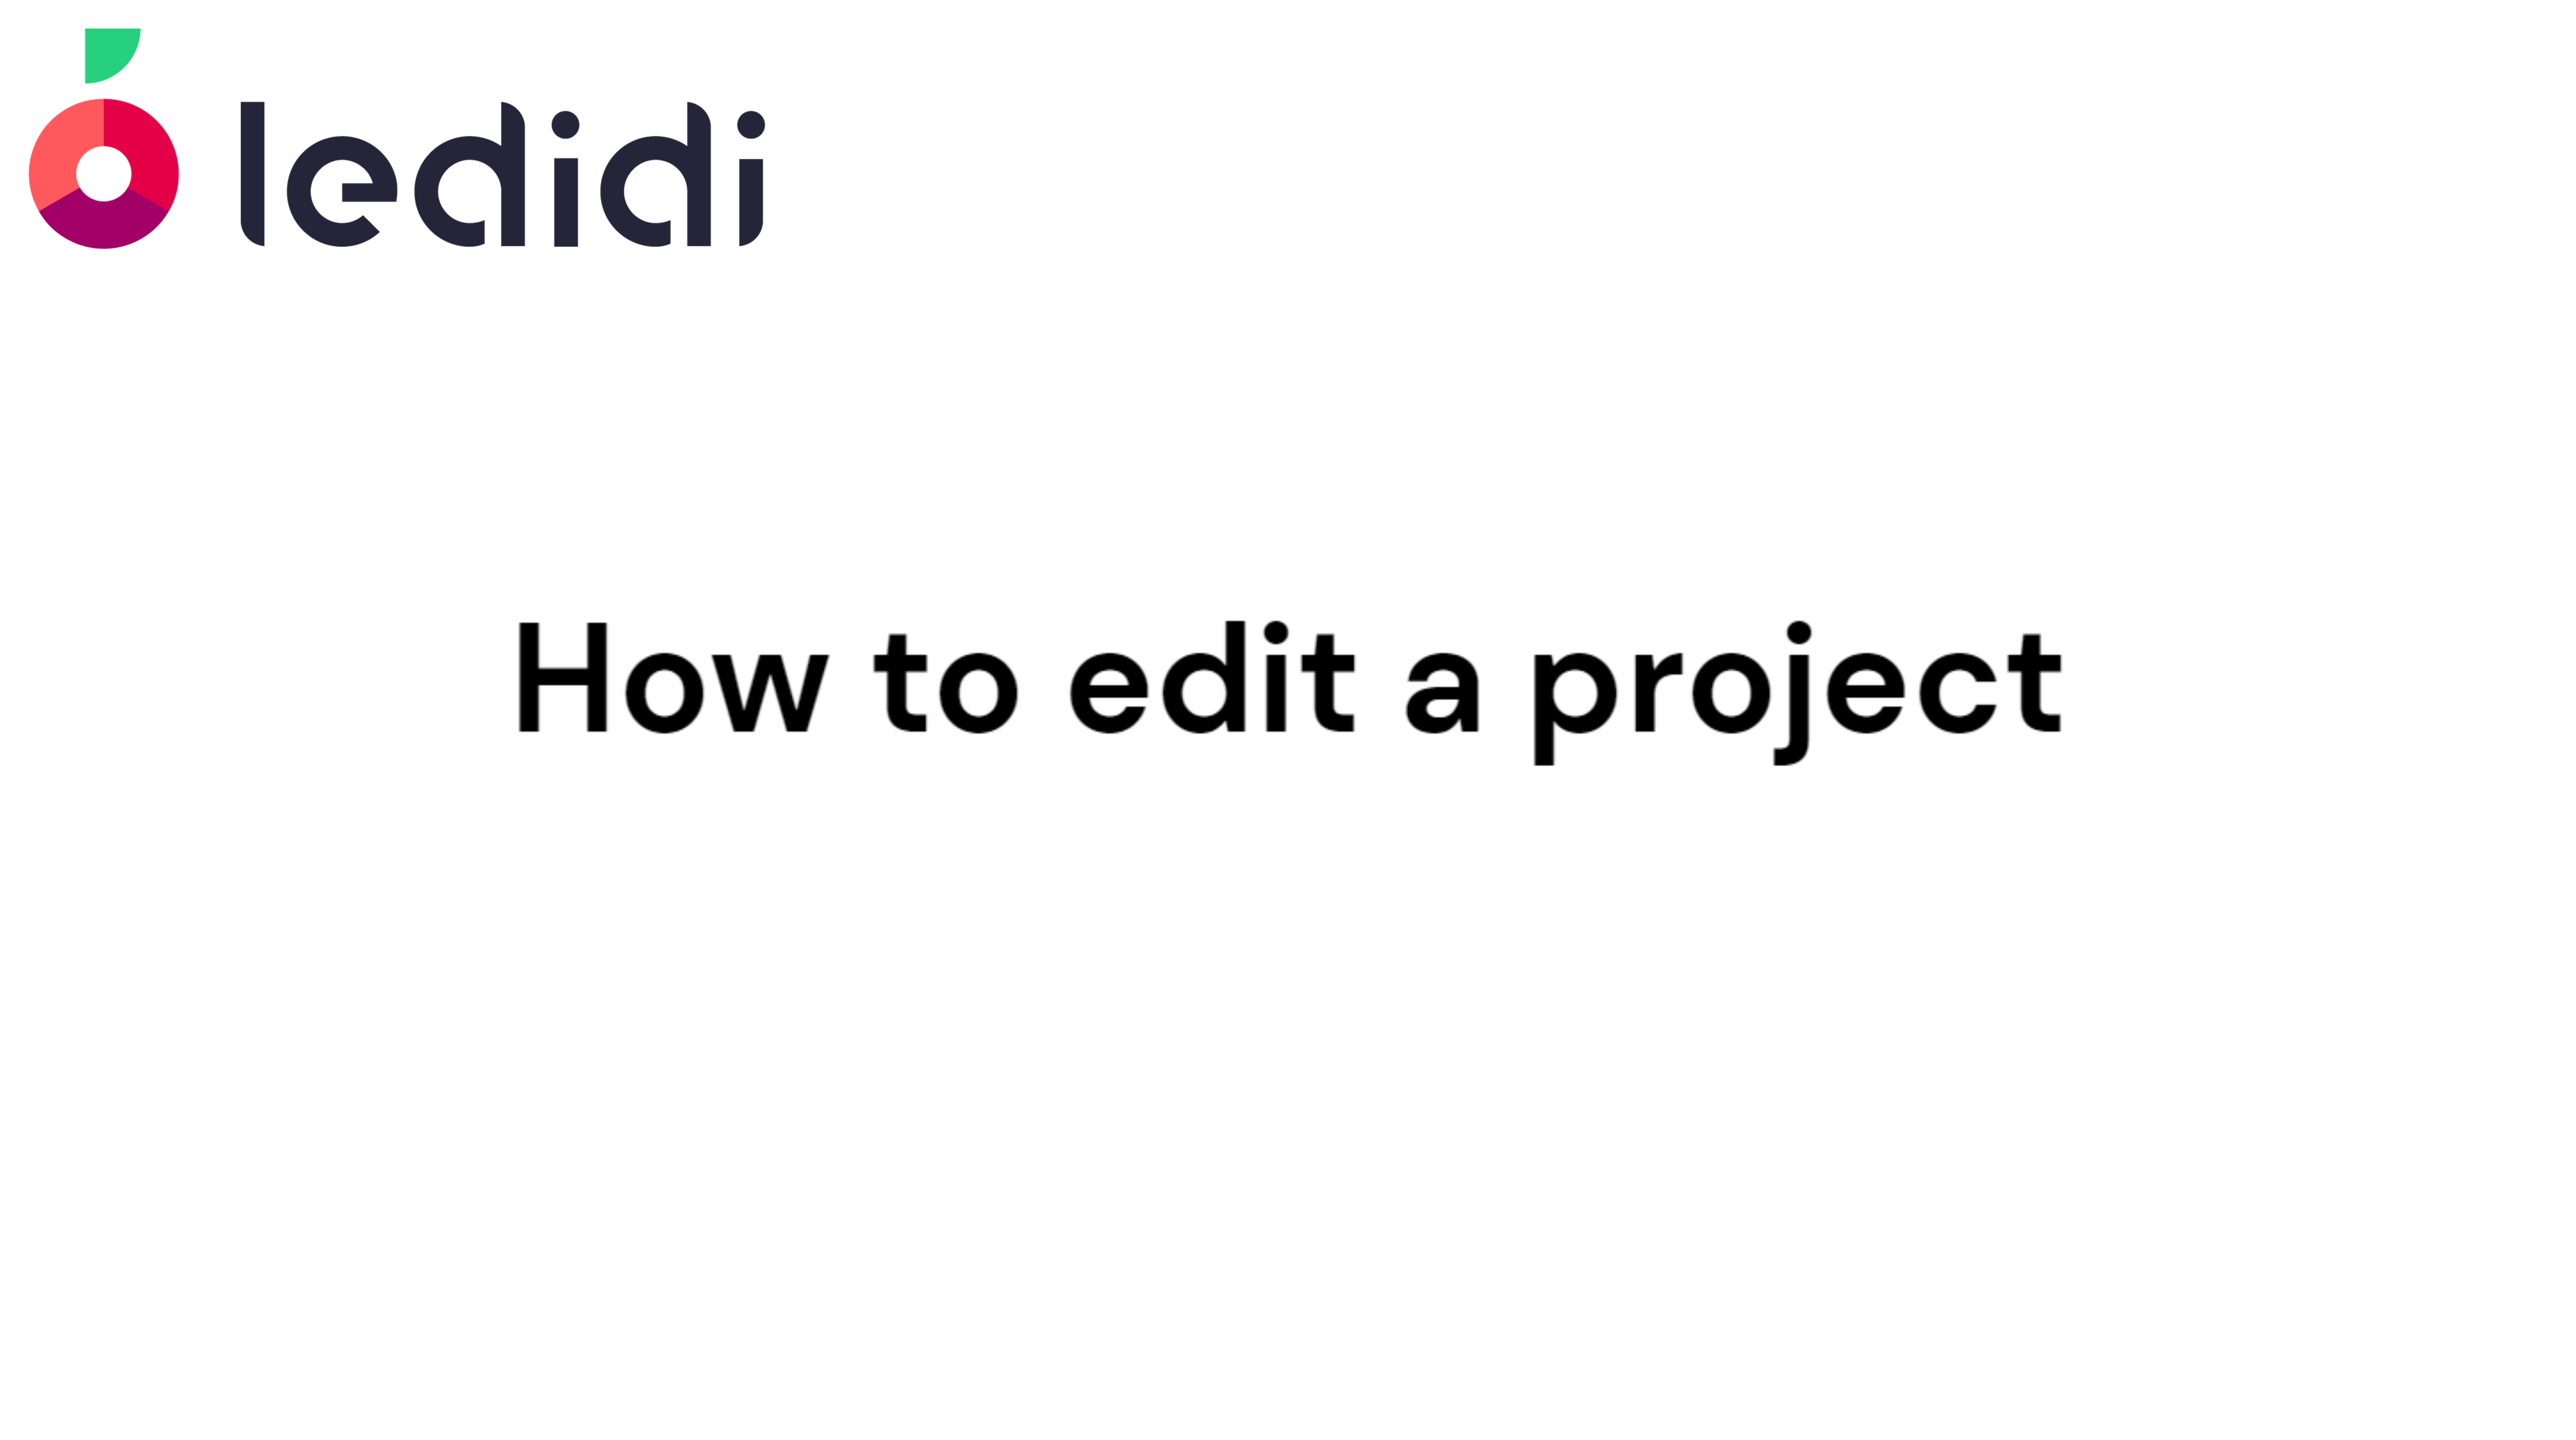 How to edit a project